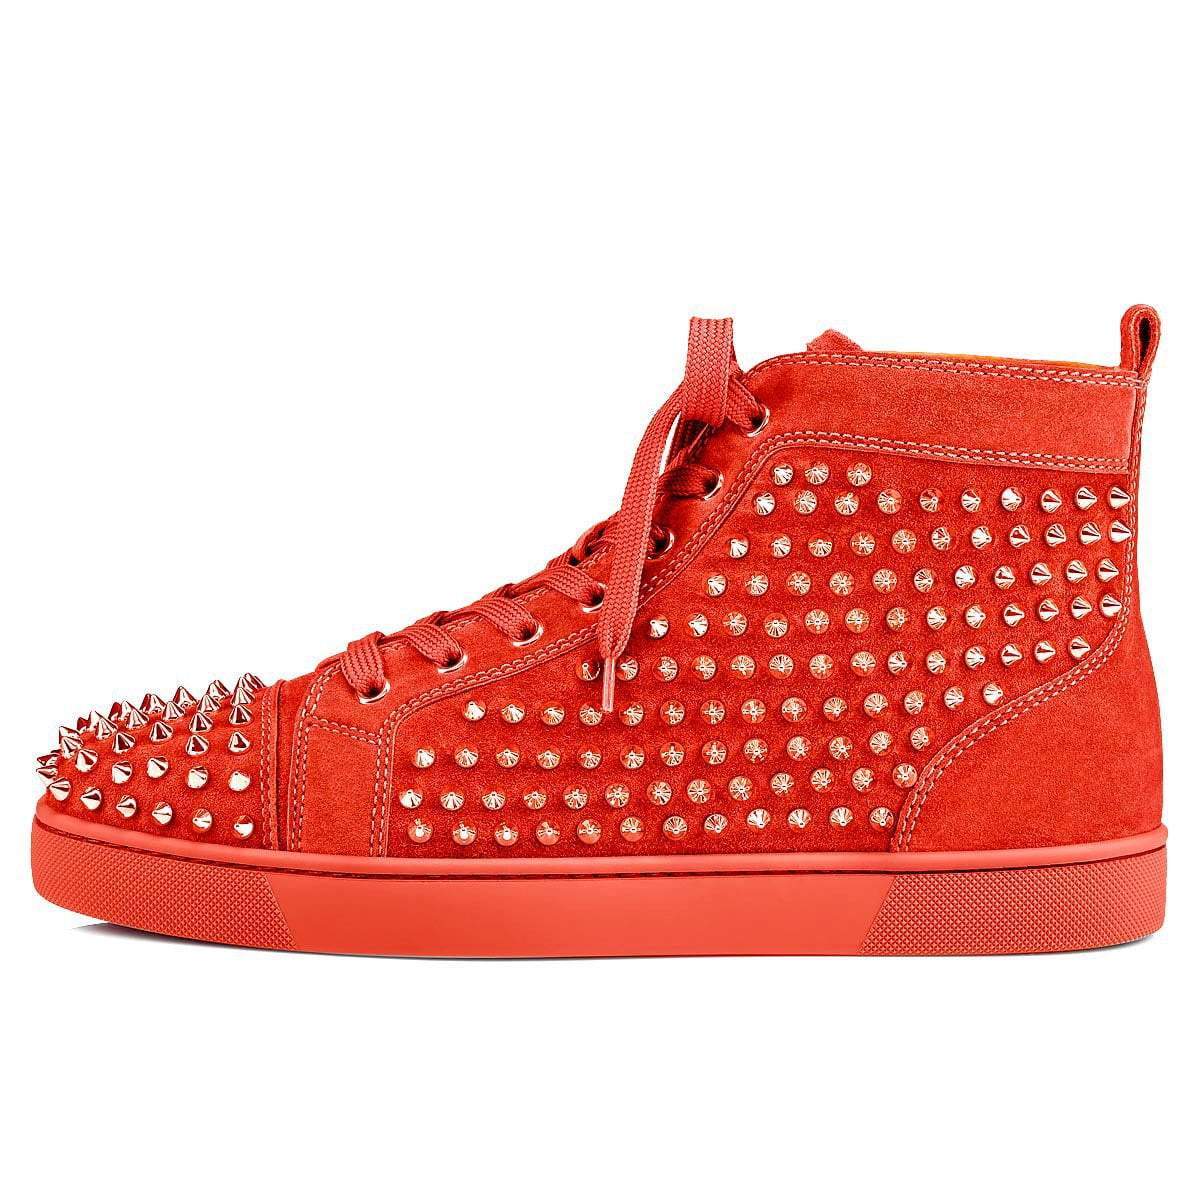 Spikes Exclusive High Top Leather Sneakers